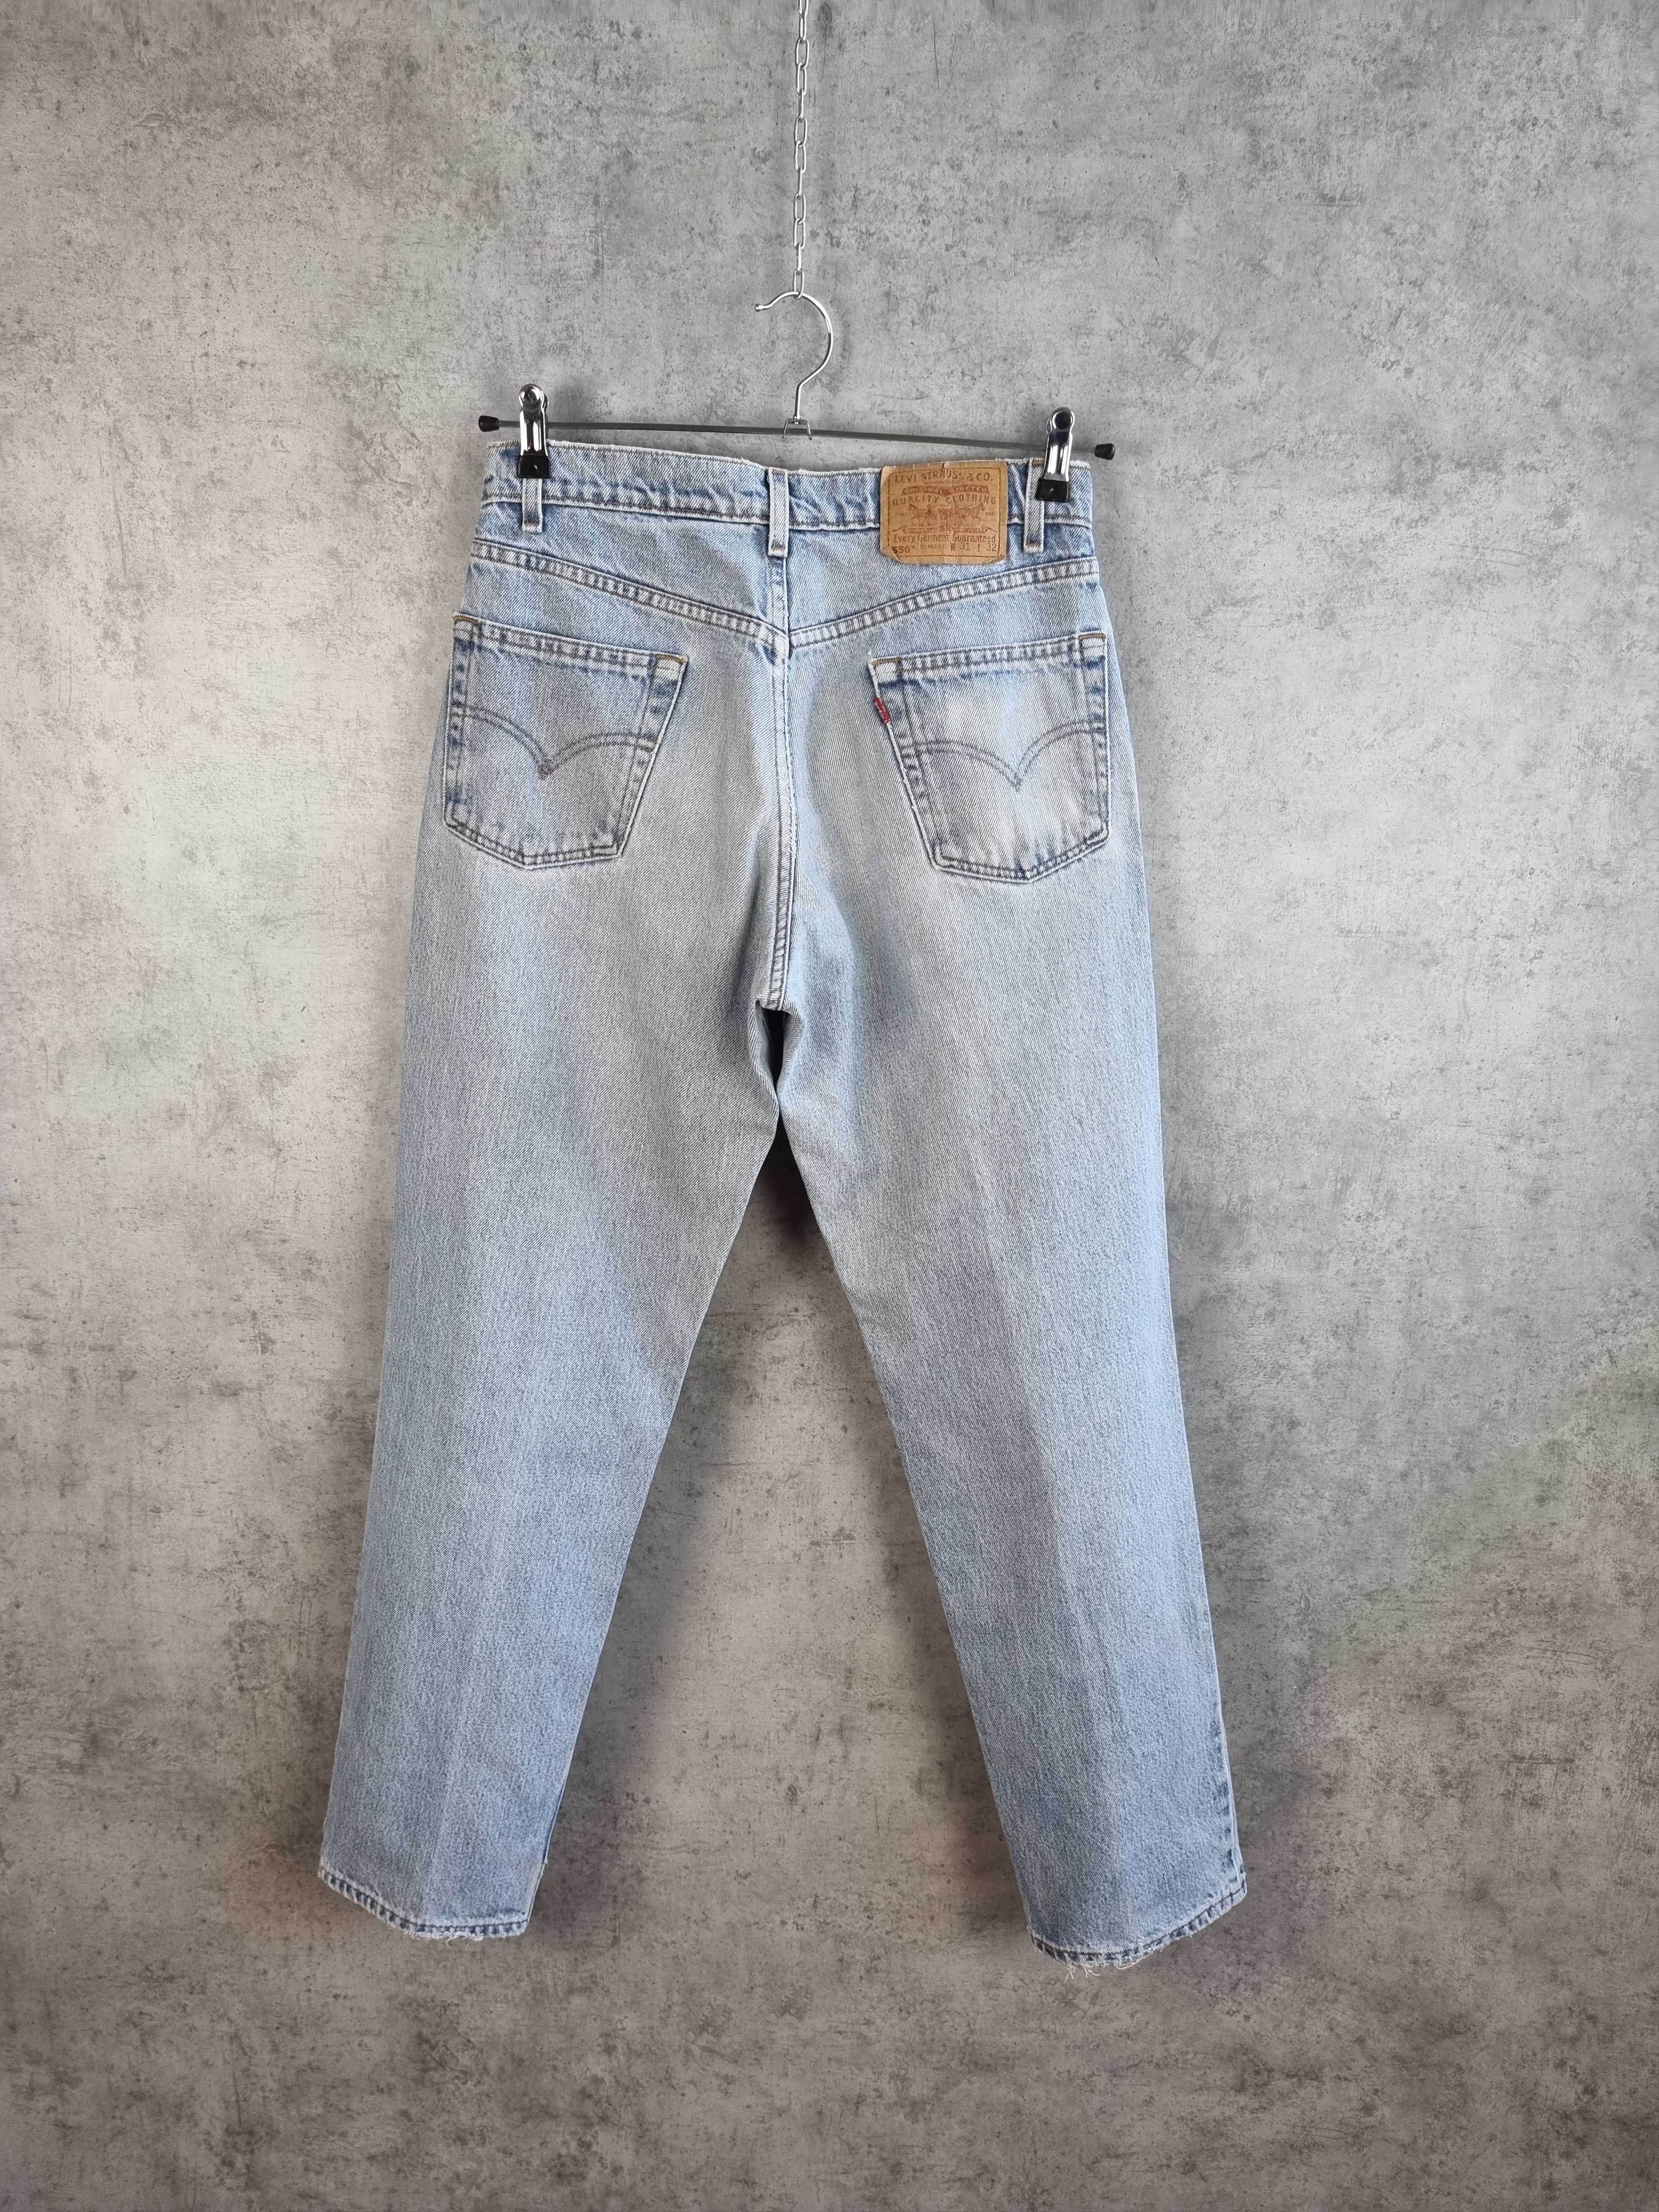 Vintage 80s LEVIS 550 Relaxed fit Dirty Jeans CHROME HEARTS Fade